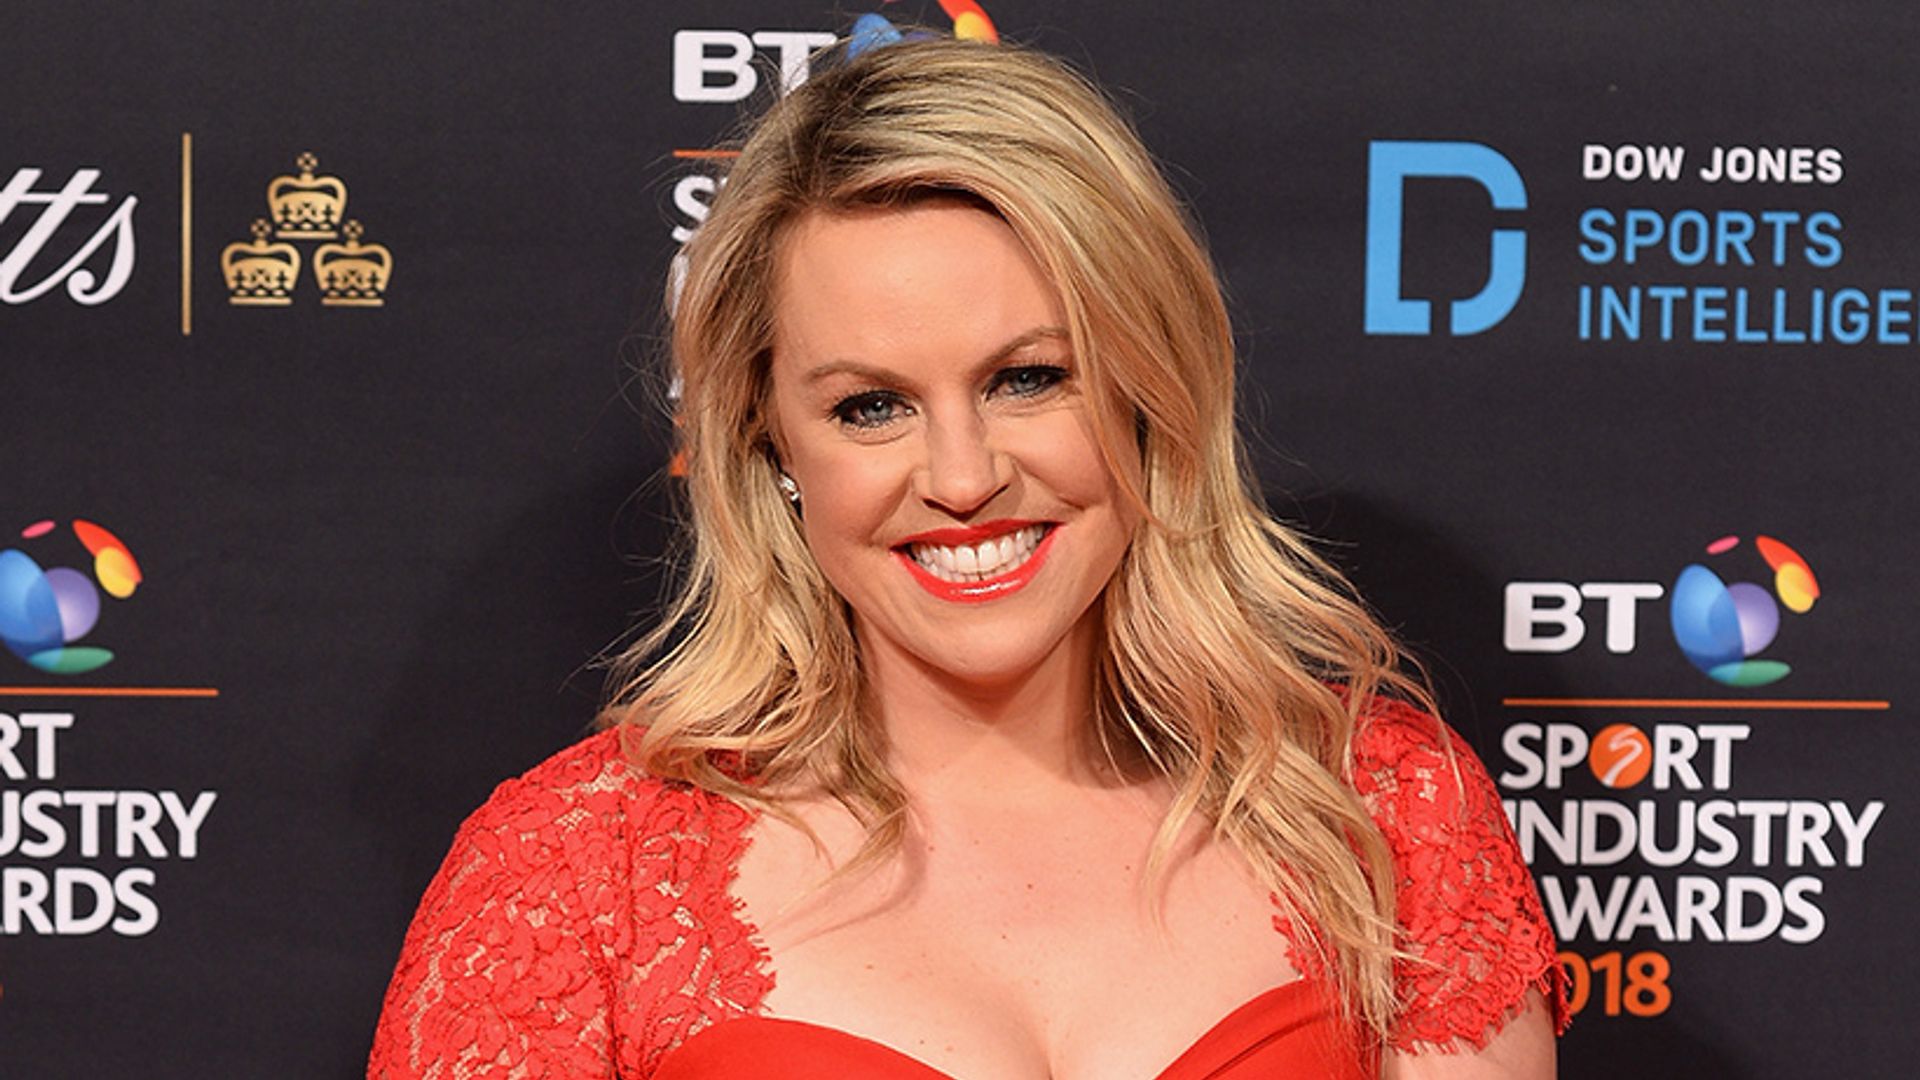 Olympic skier Chemmy Alcott expecting second baby with husband Dougie Crawford